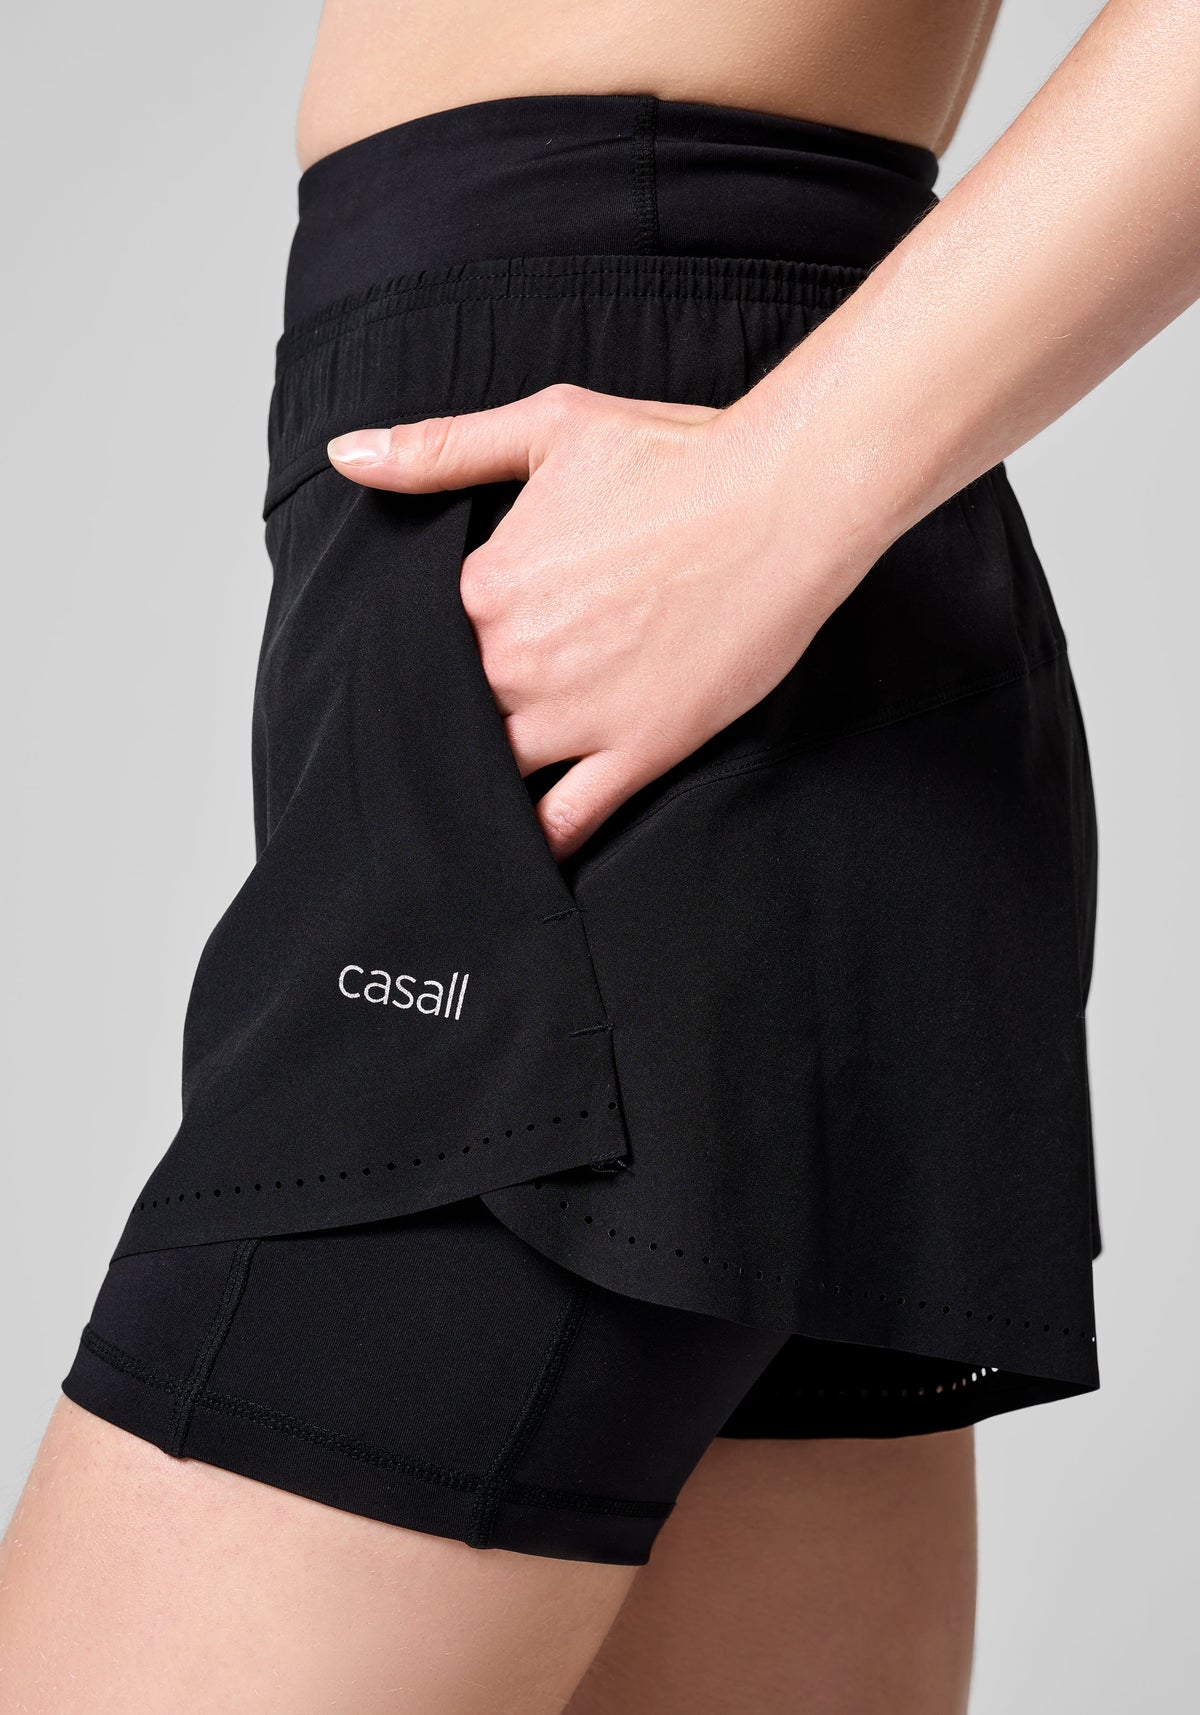 Casall Shaping Double Shorts - Black